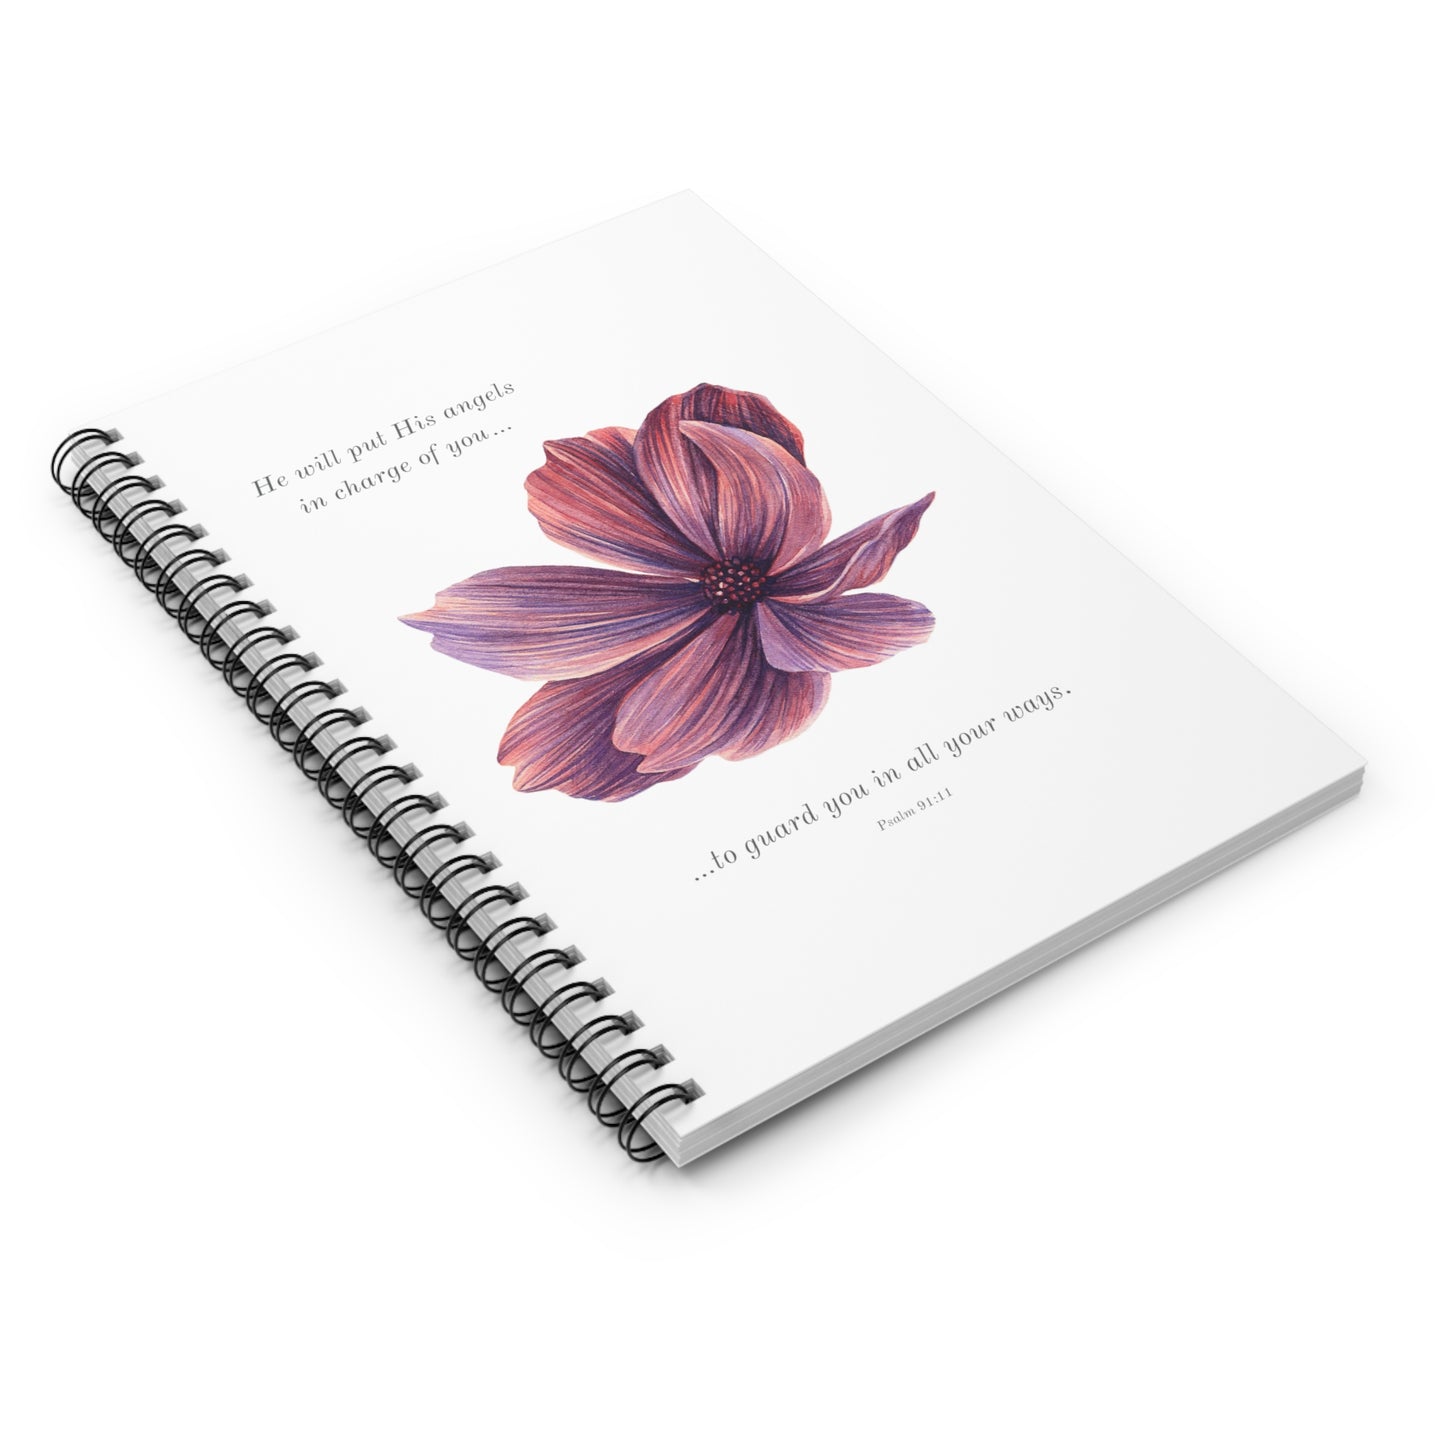 Spiral Notebook - Angels To Guard You in All of Your Ways